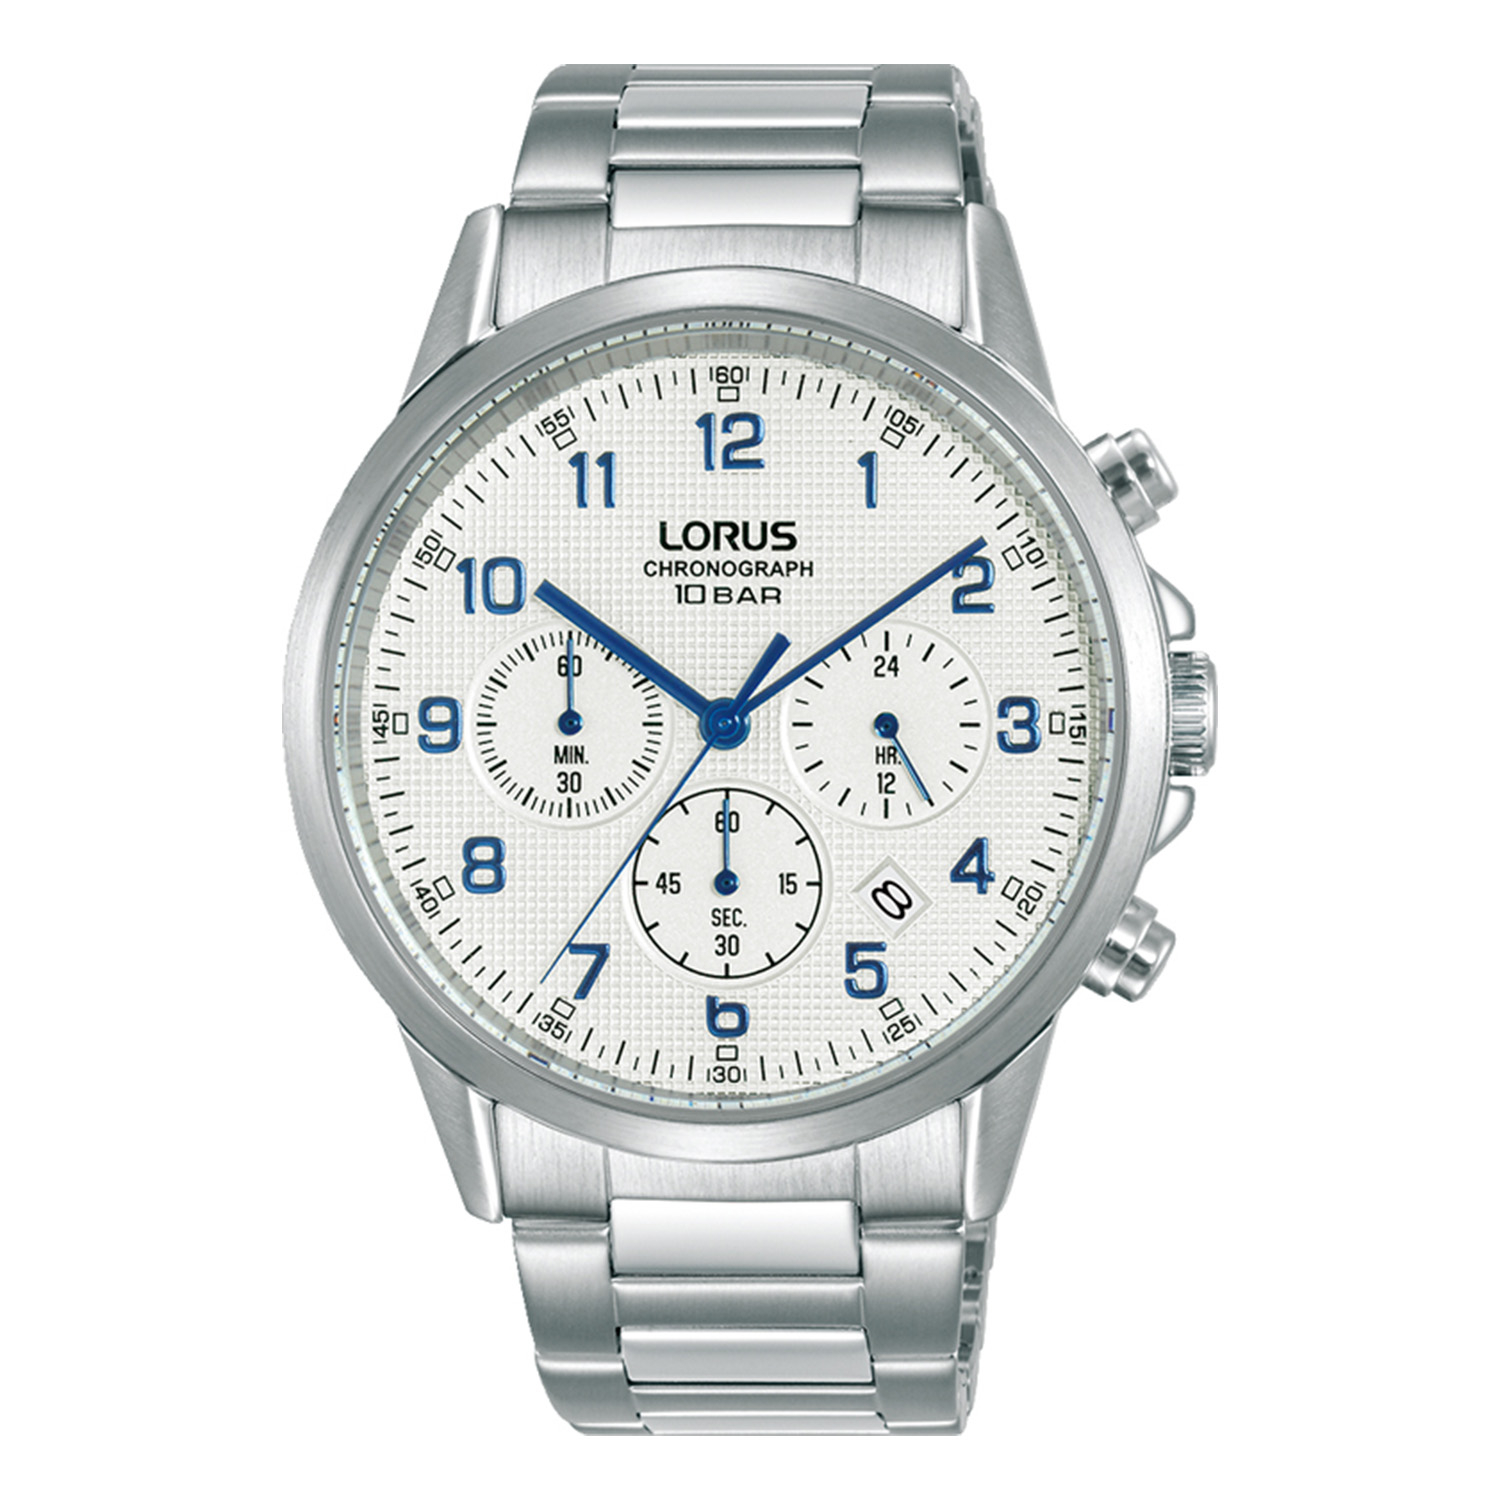 Mens LORUS stainless steel watch with white dial and silver bracelet.